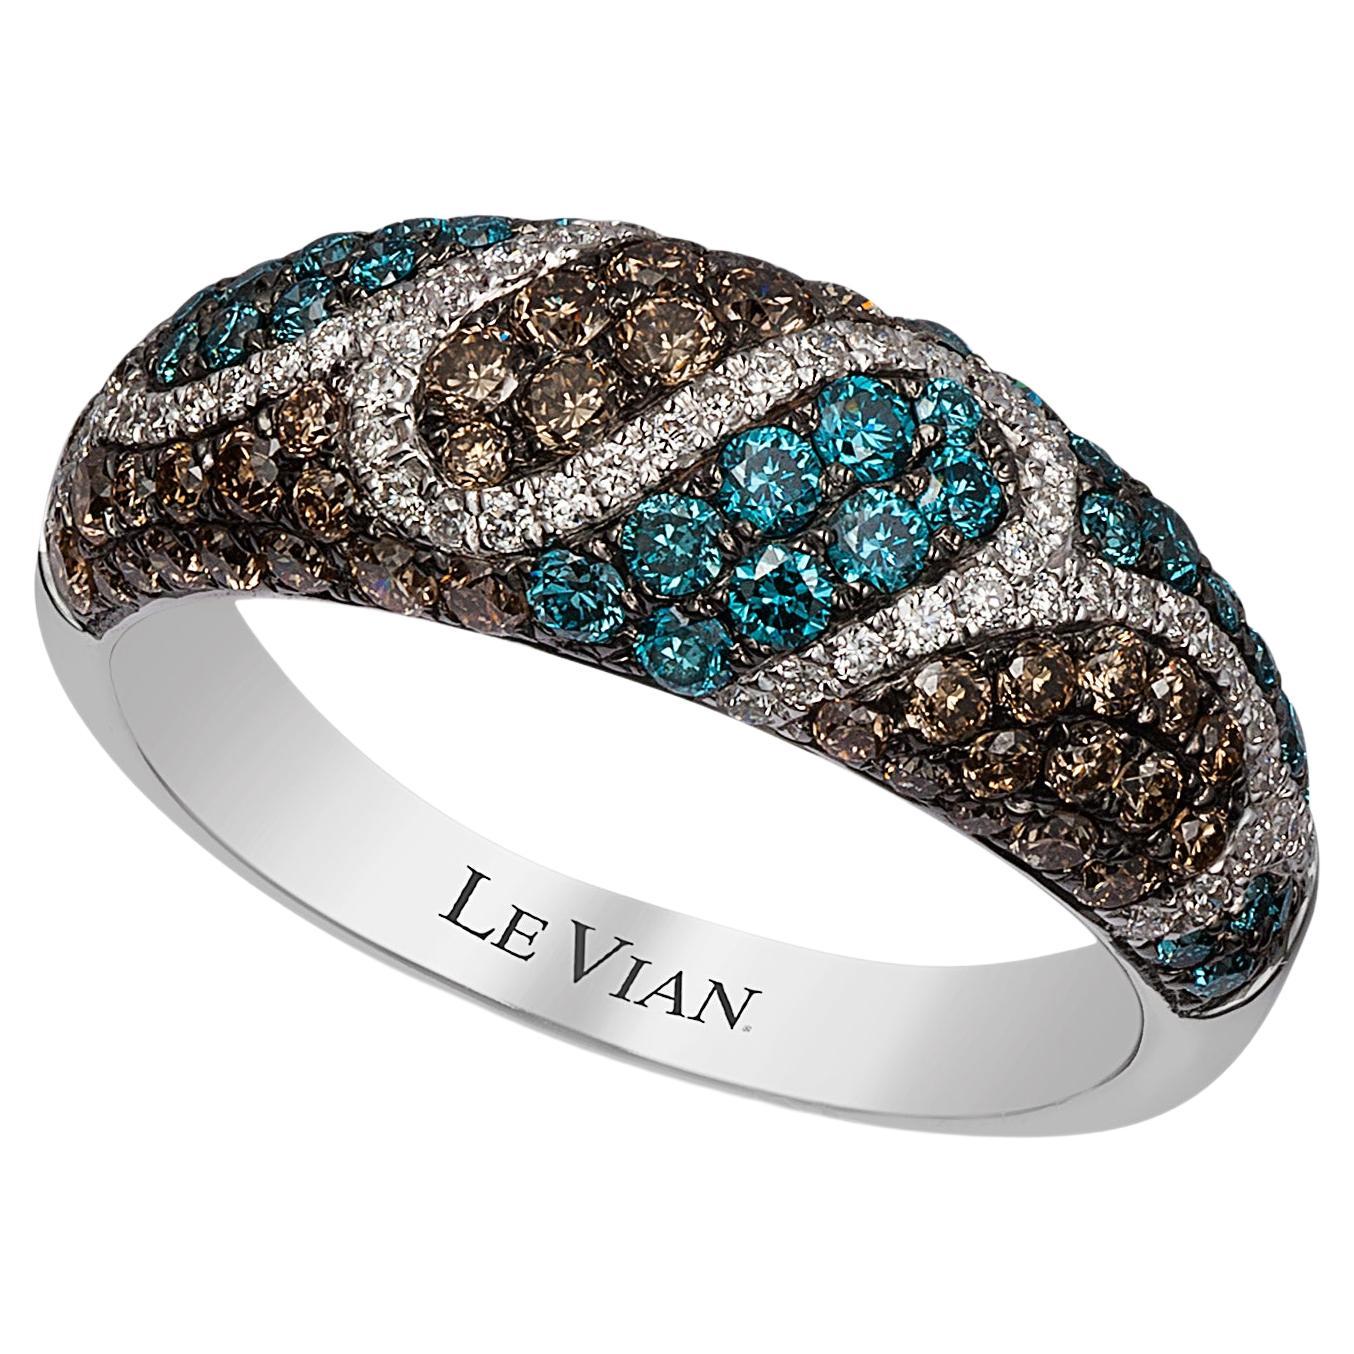 Le Vian Ring 1 Cts Blue Chocolate White Natural Diamonds Set in 14K White Gold